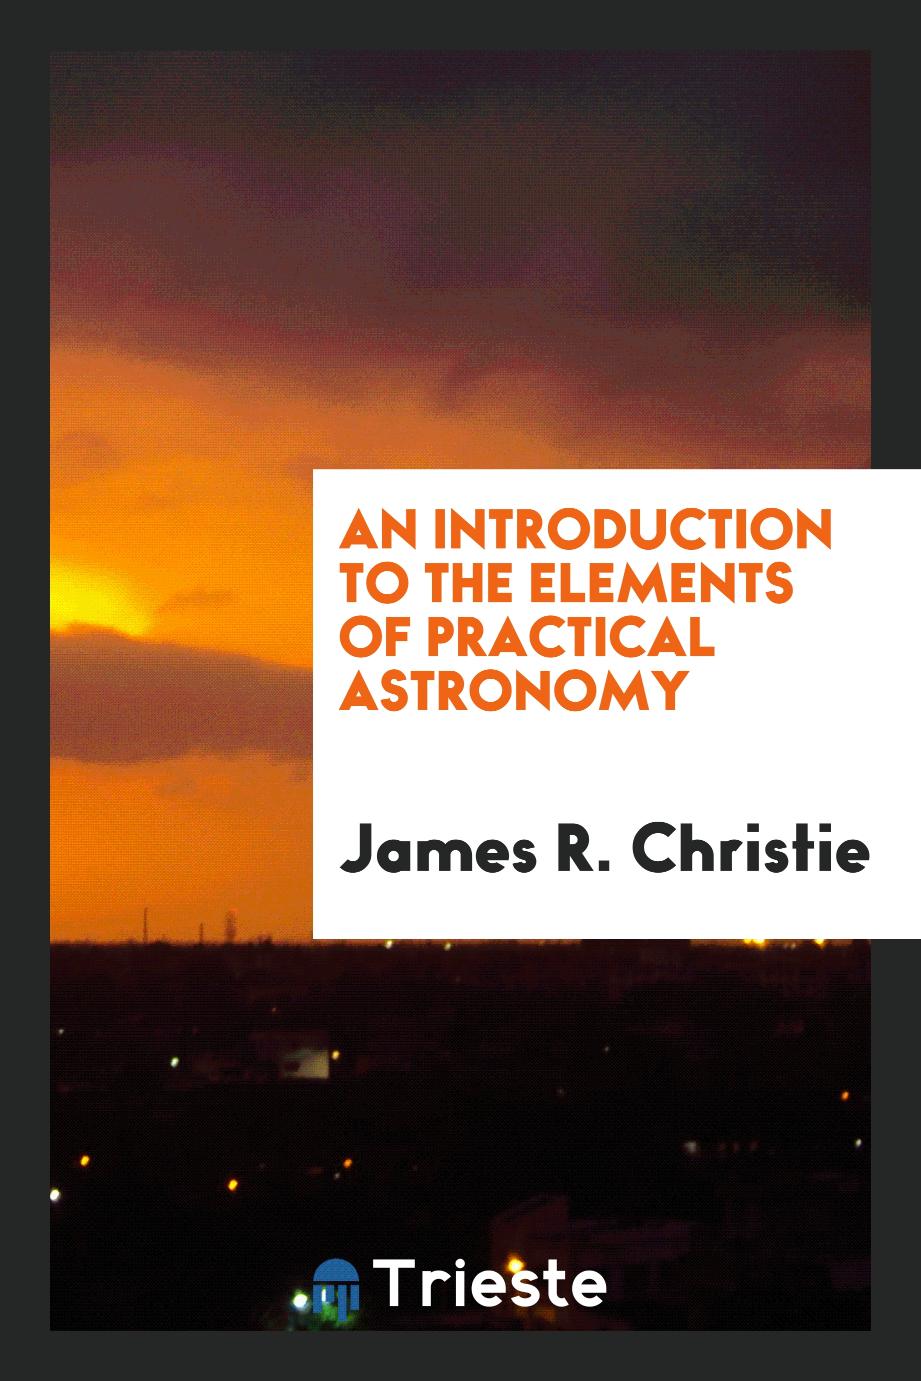 An Introduction to the Elements of Practical Astronomy